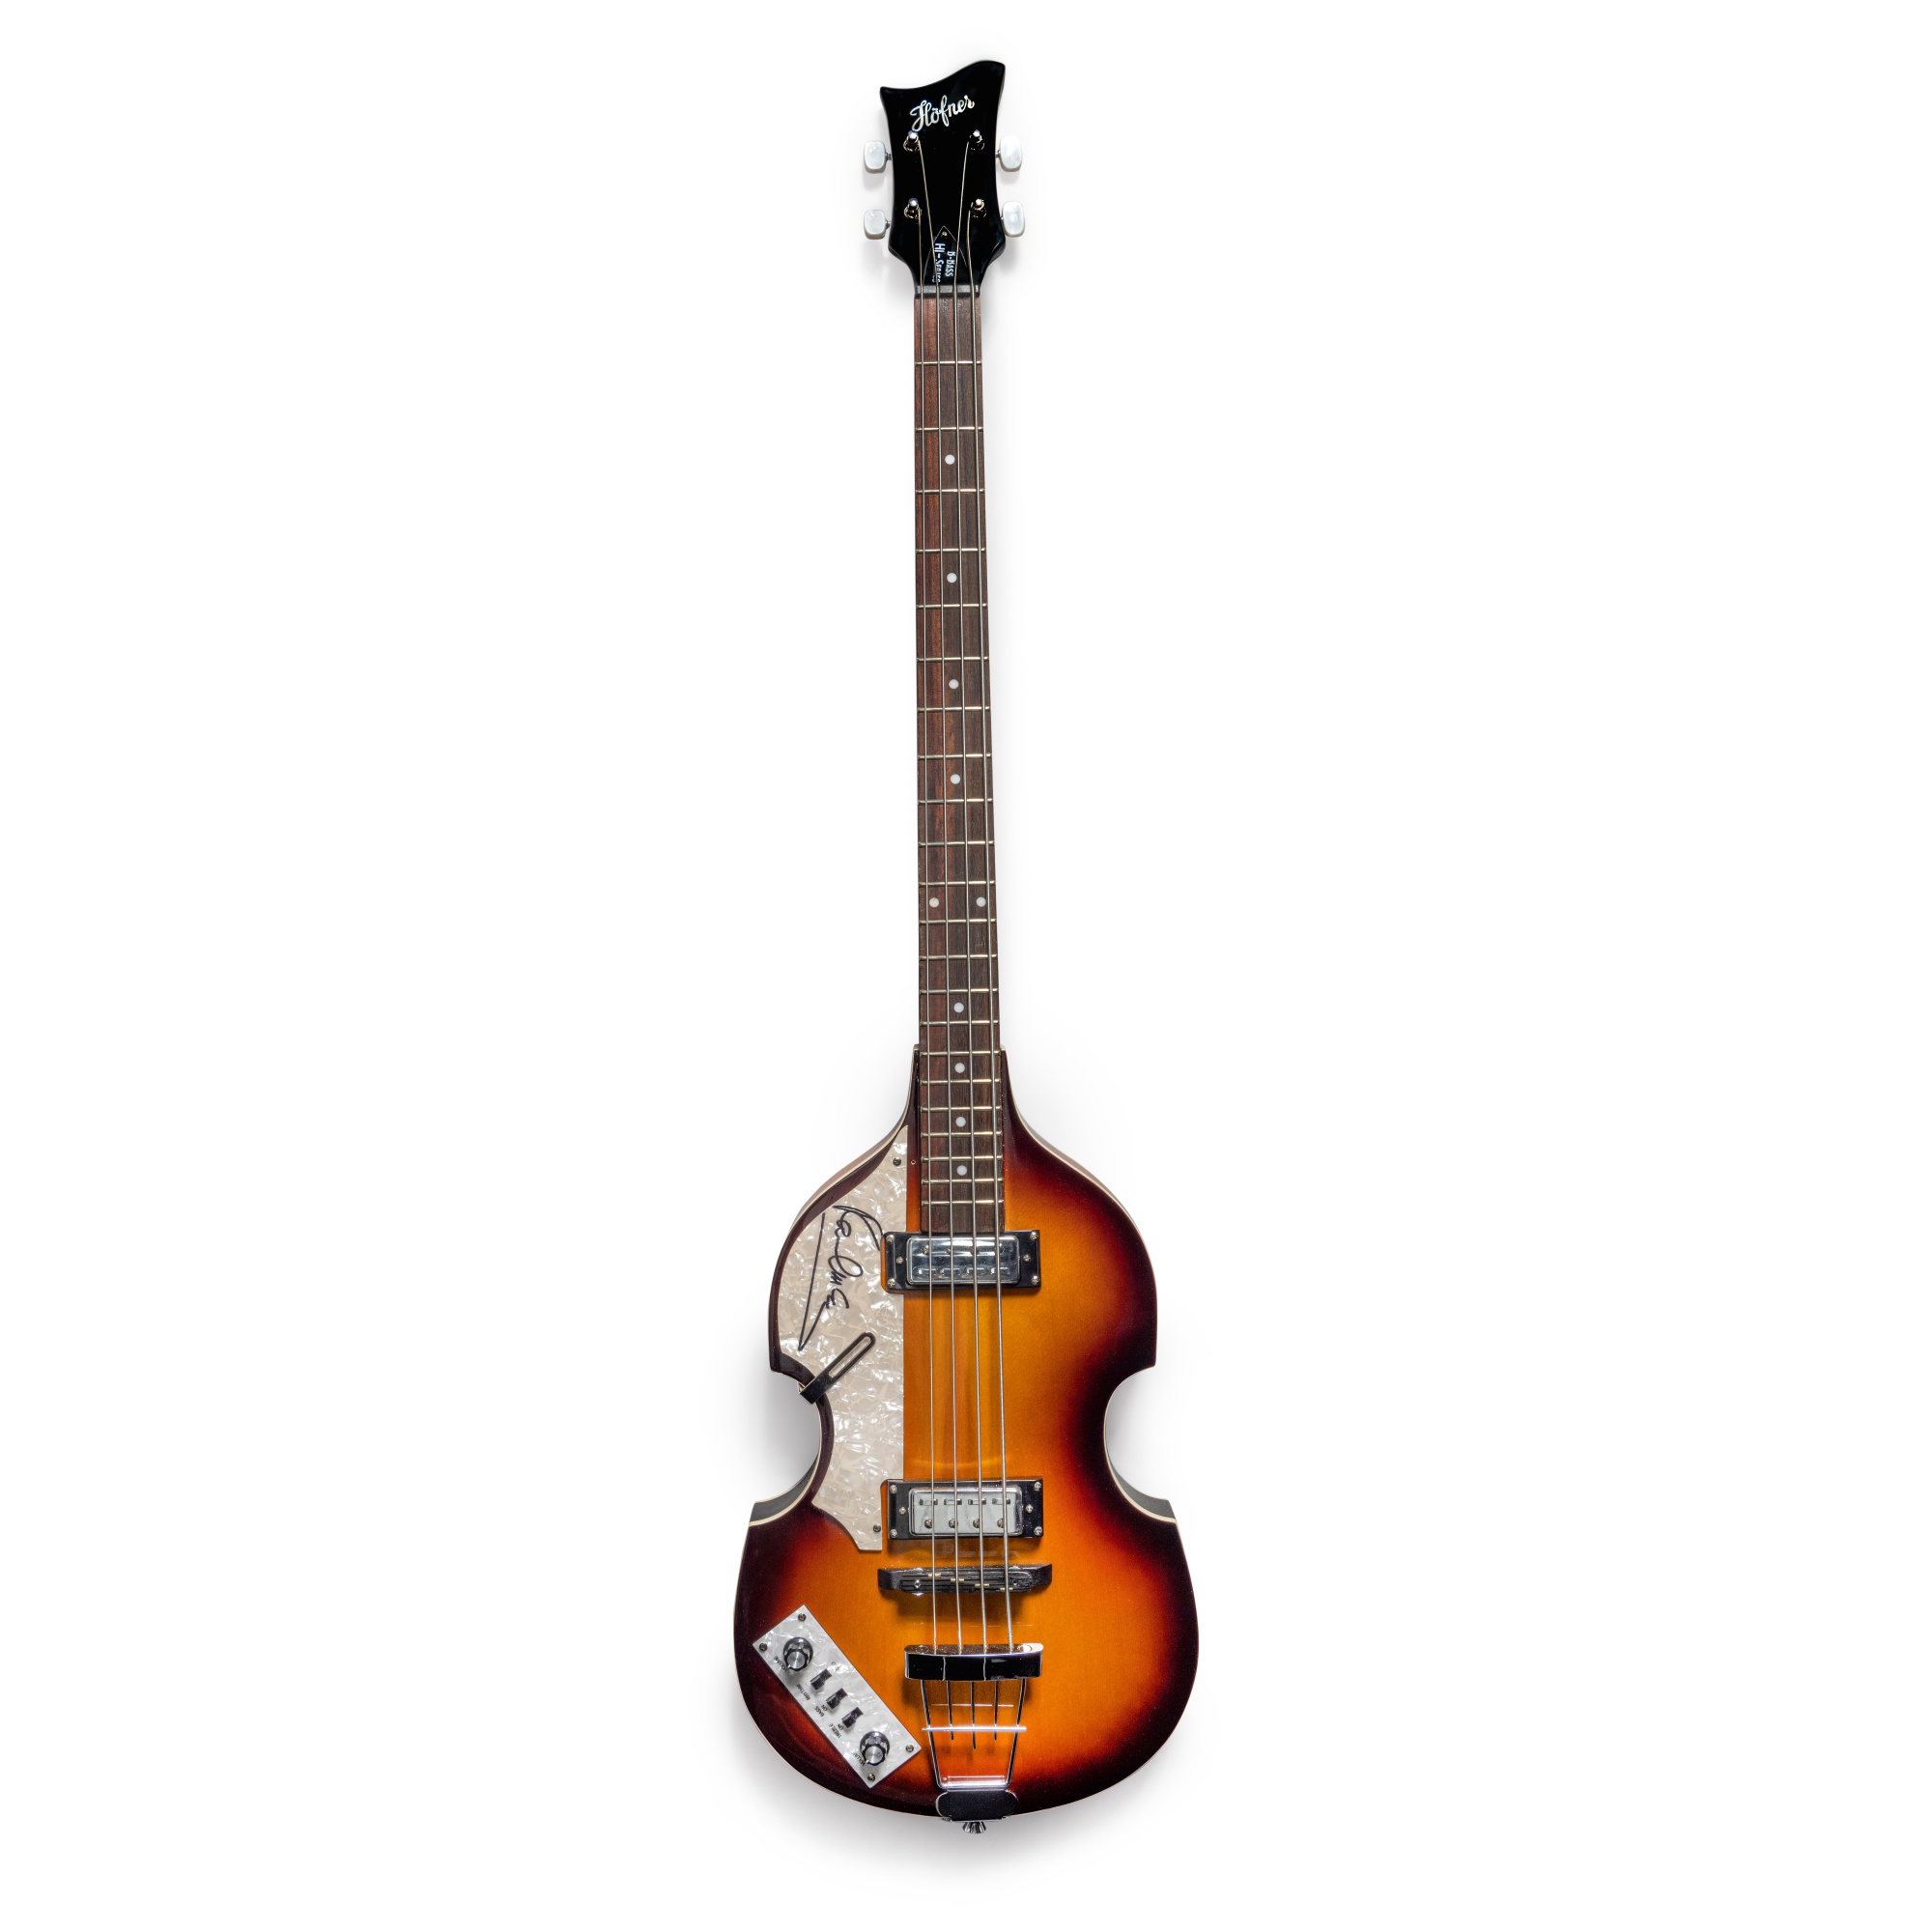 Online campaign to search for Paul McCartney's lost Höfner bass ...